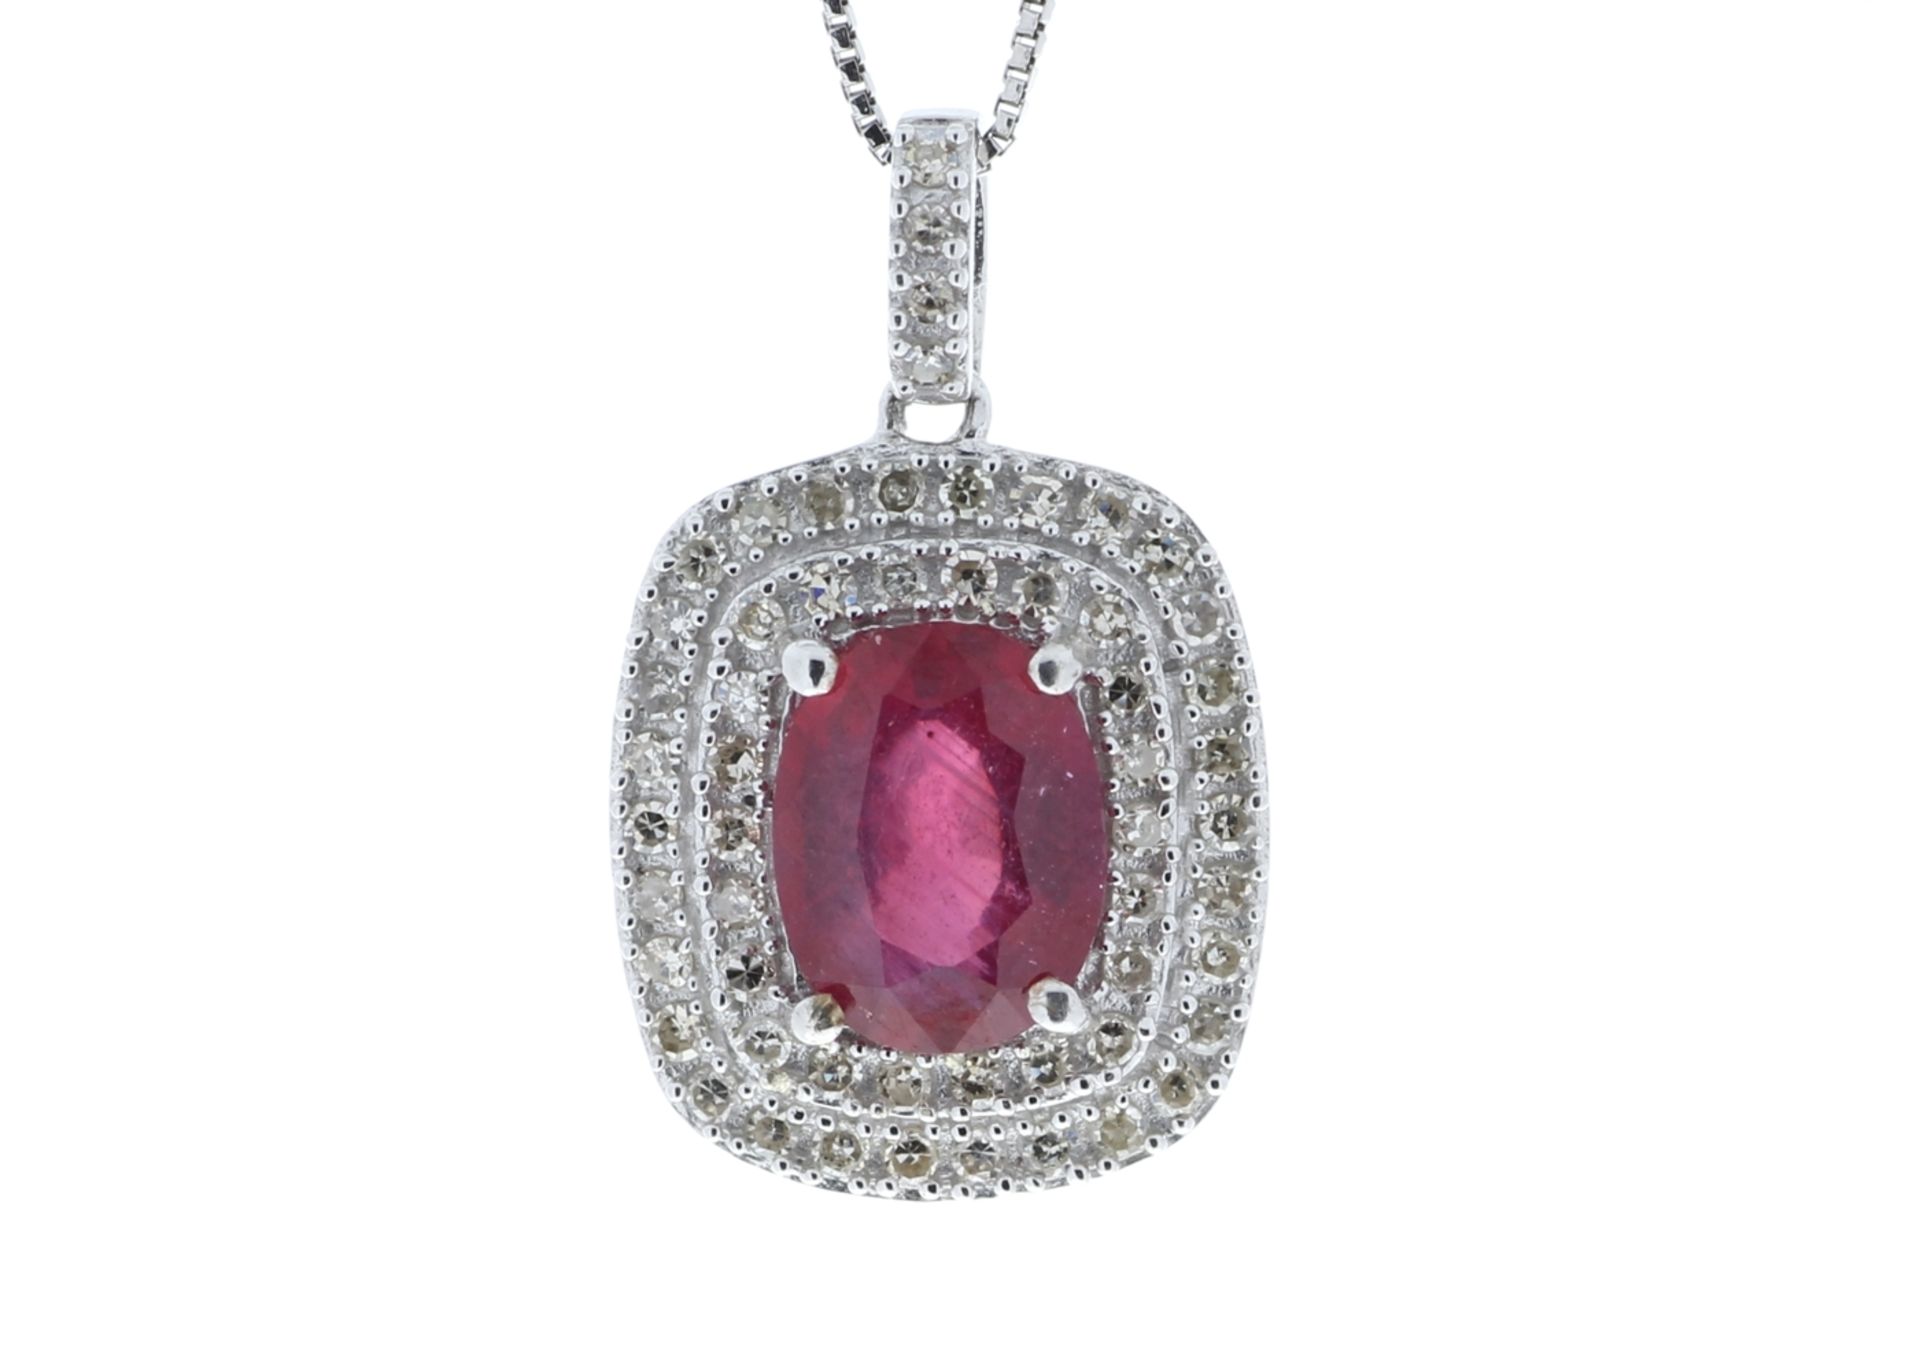 9ct White Gold Oval Ruby And Diamond Cluster Pendant (R1.54) 0.28 Carats - Valued By GIE £2,710.00 - - Image 4 of 6